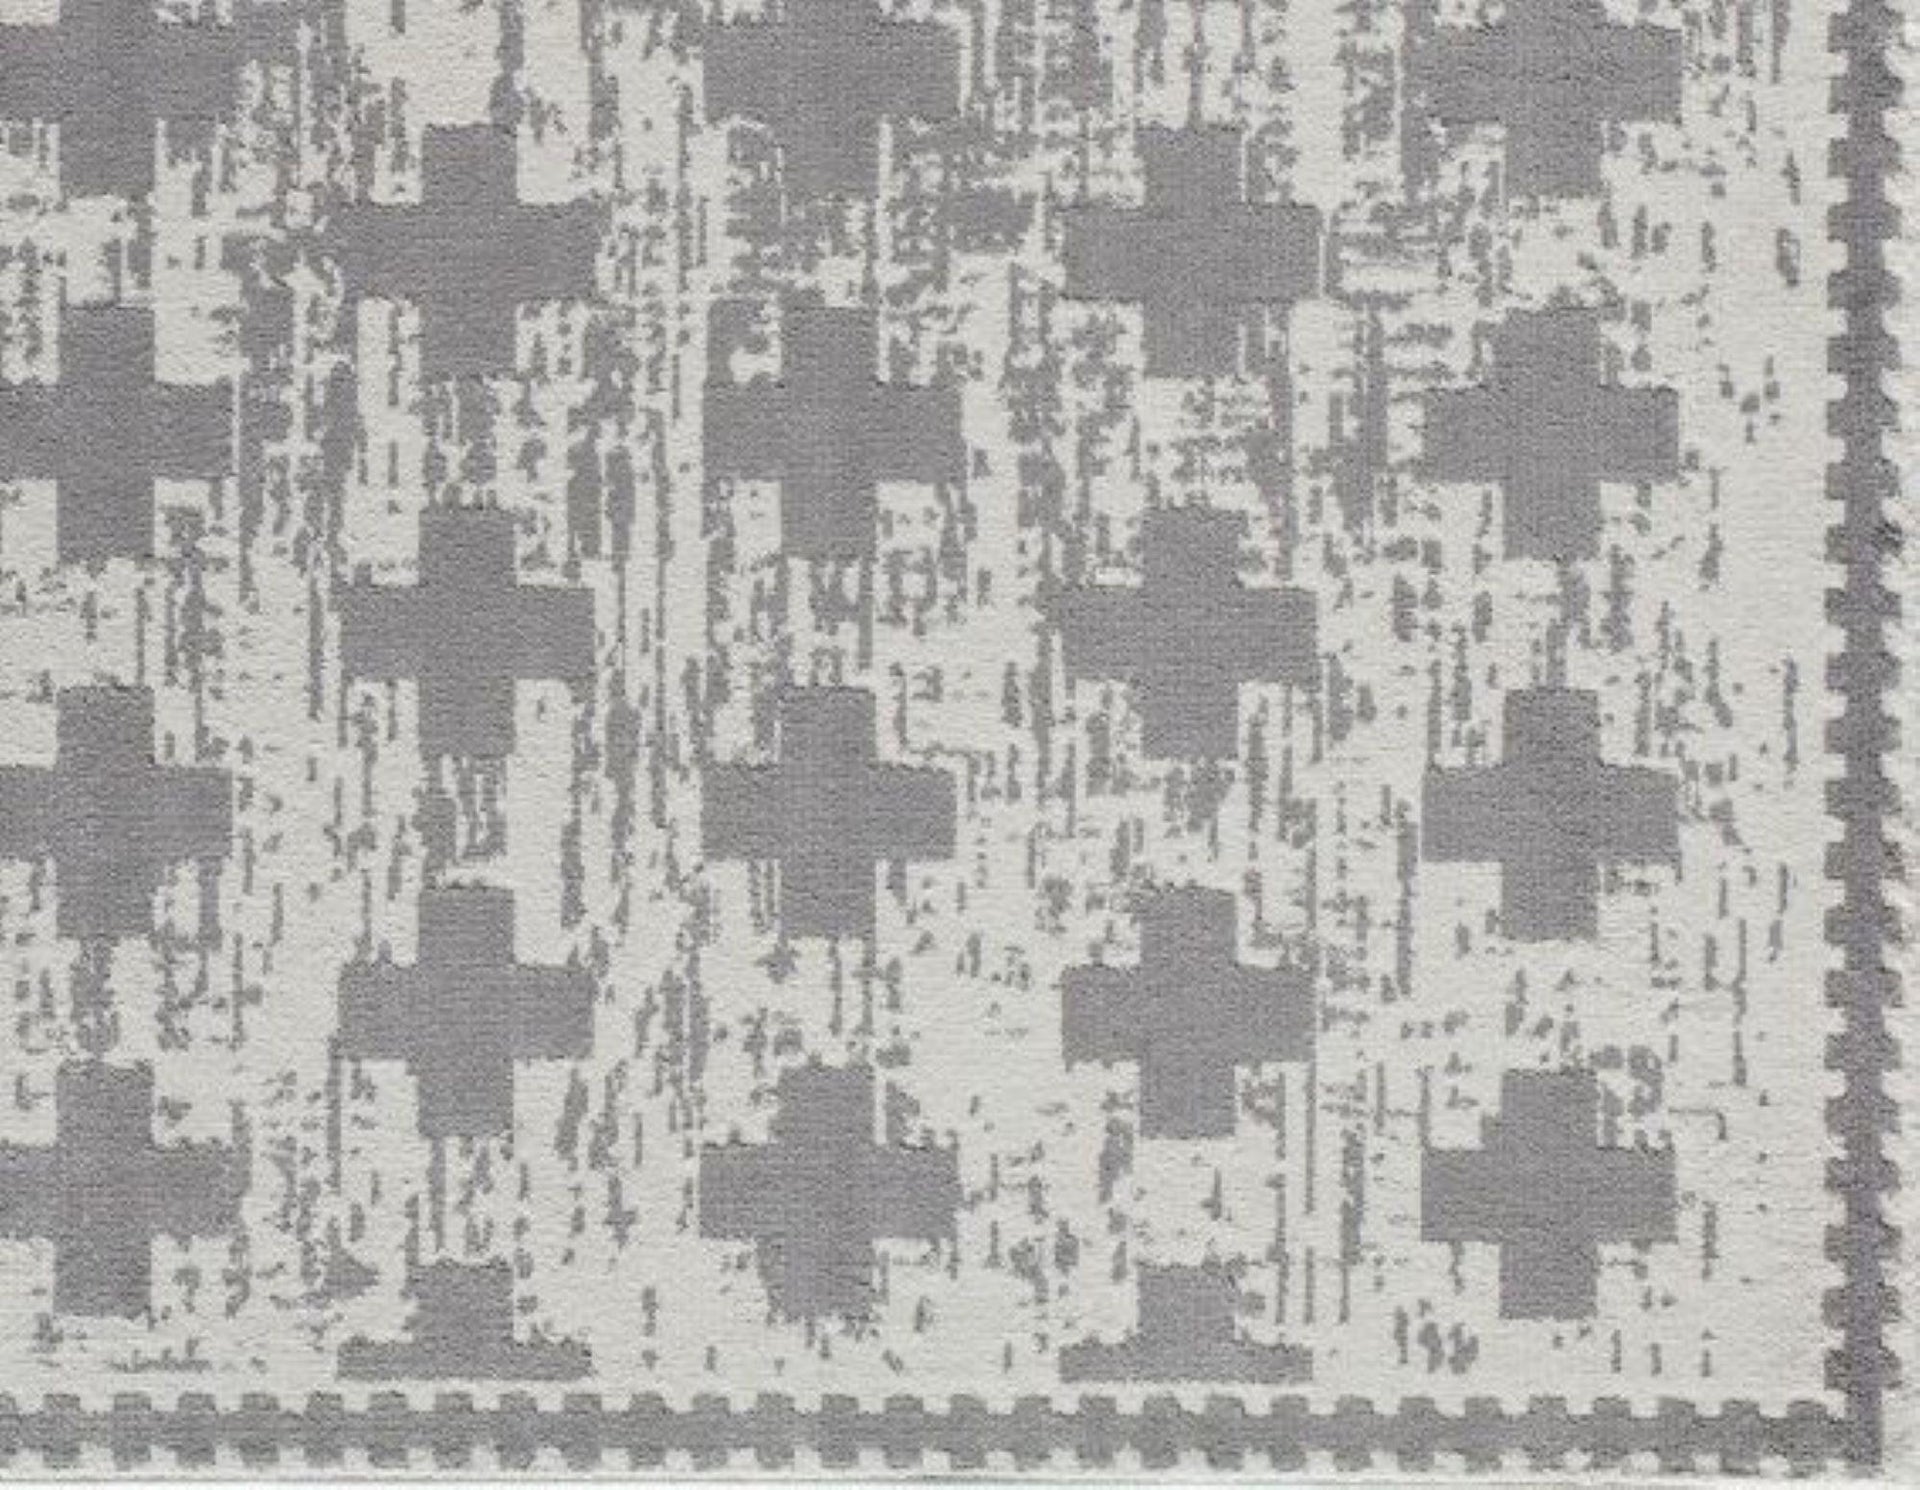 Little Seeds Serenity Impression Rug Gray 8 x 10 - Gray